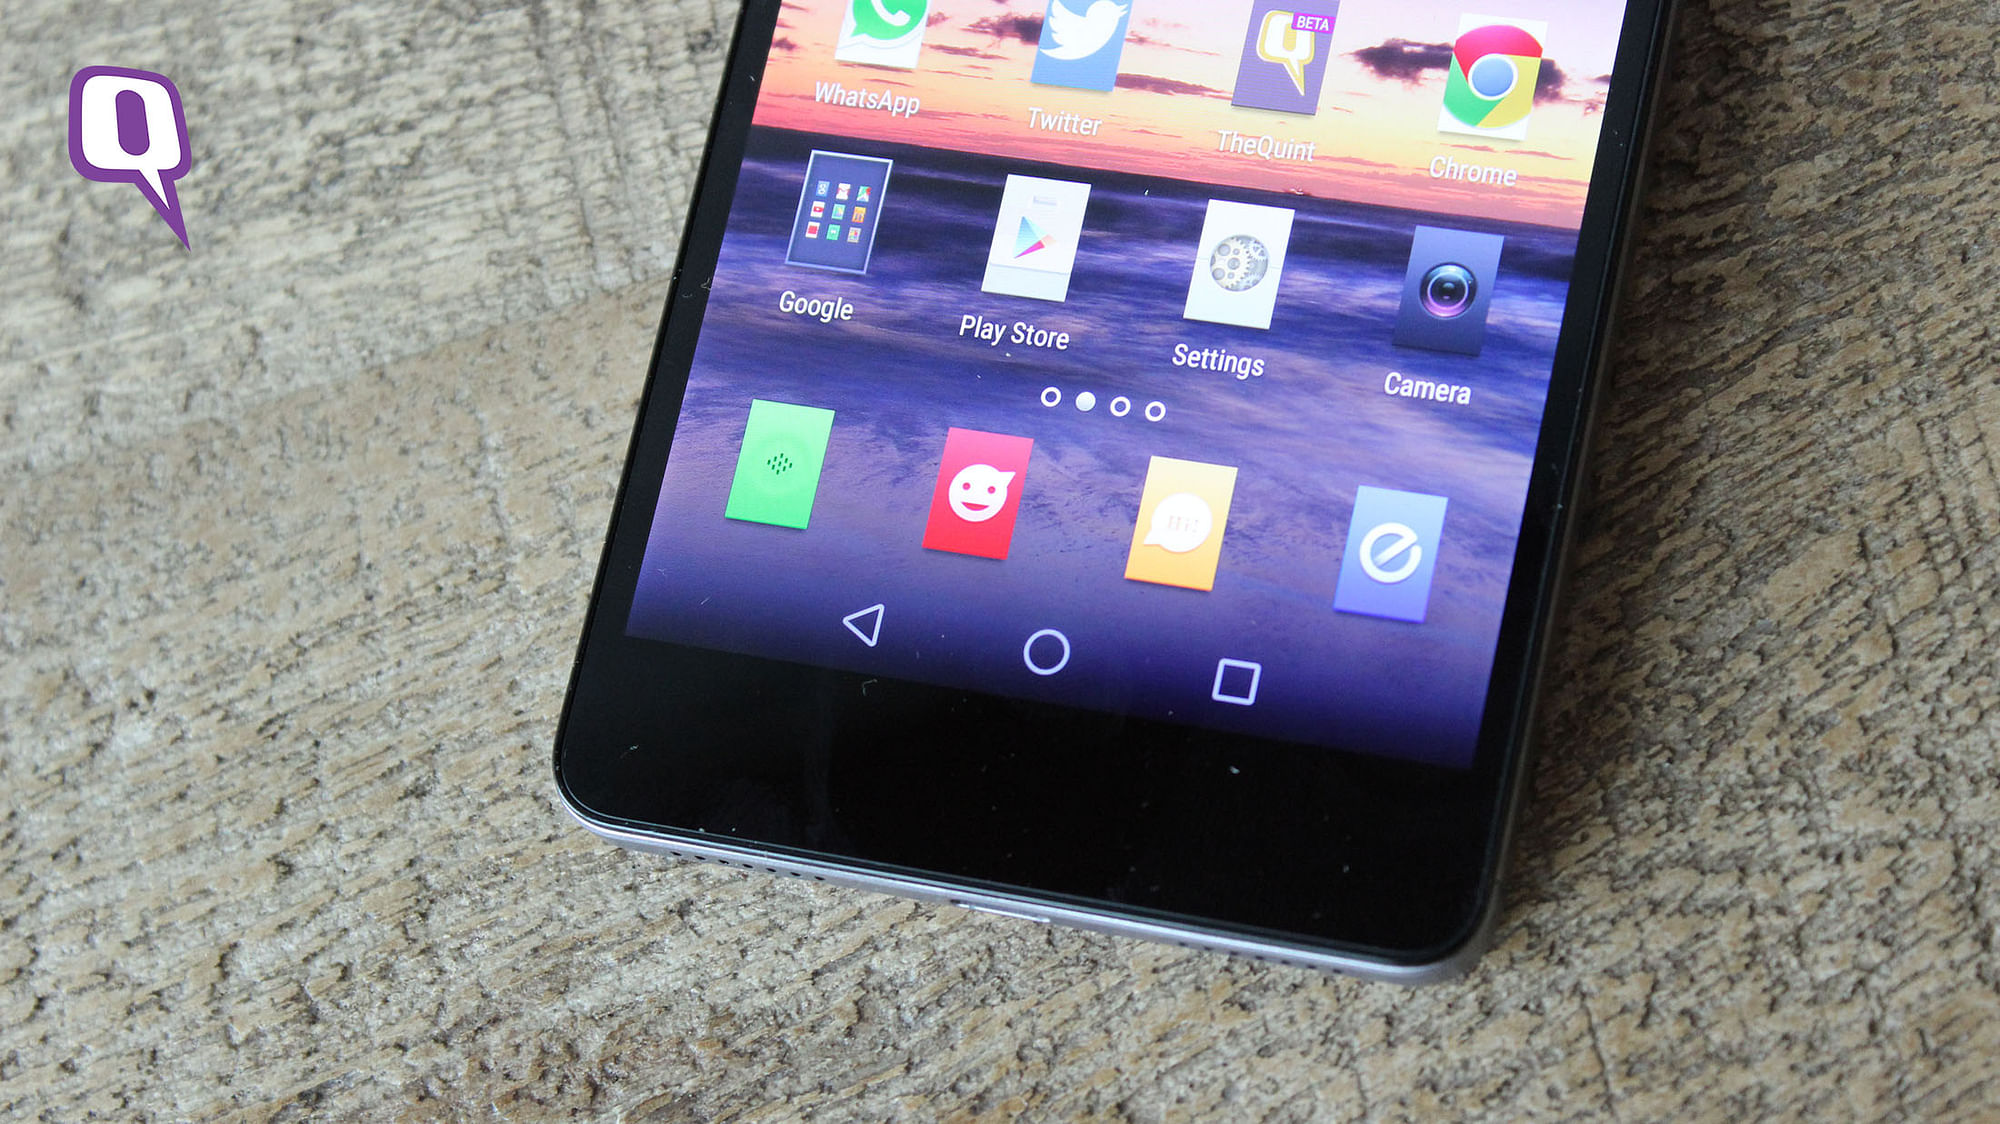 Review: The Huawei Honor 7 Smartphone Has Everything You Need